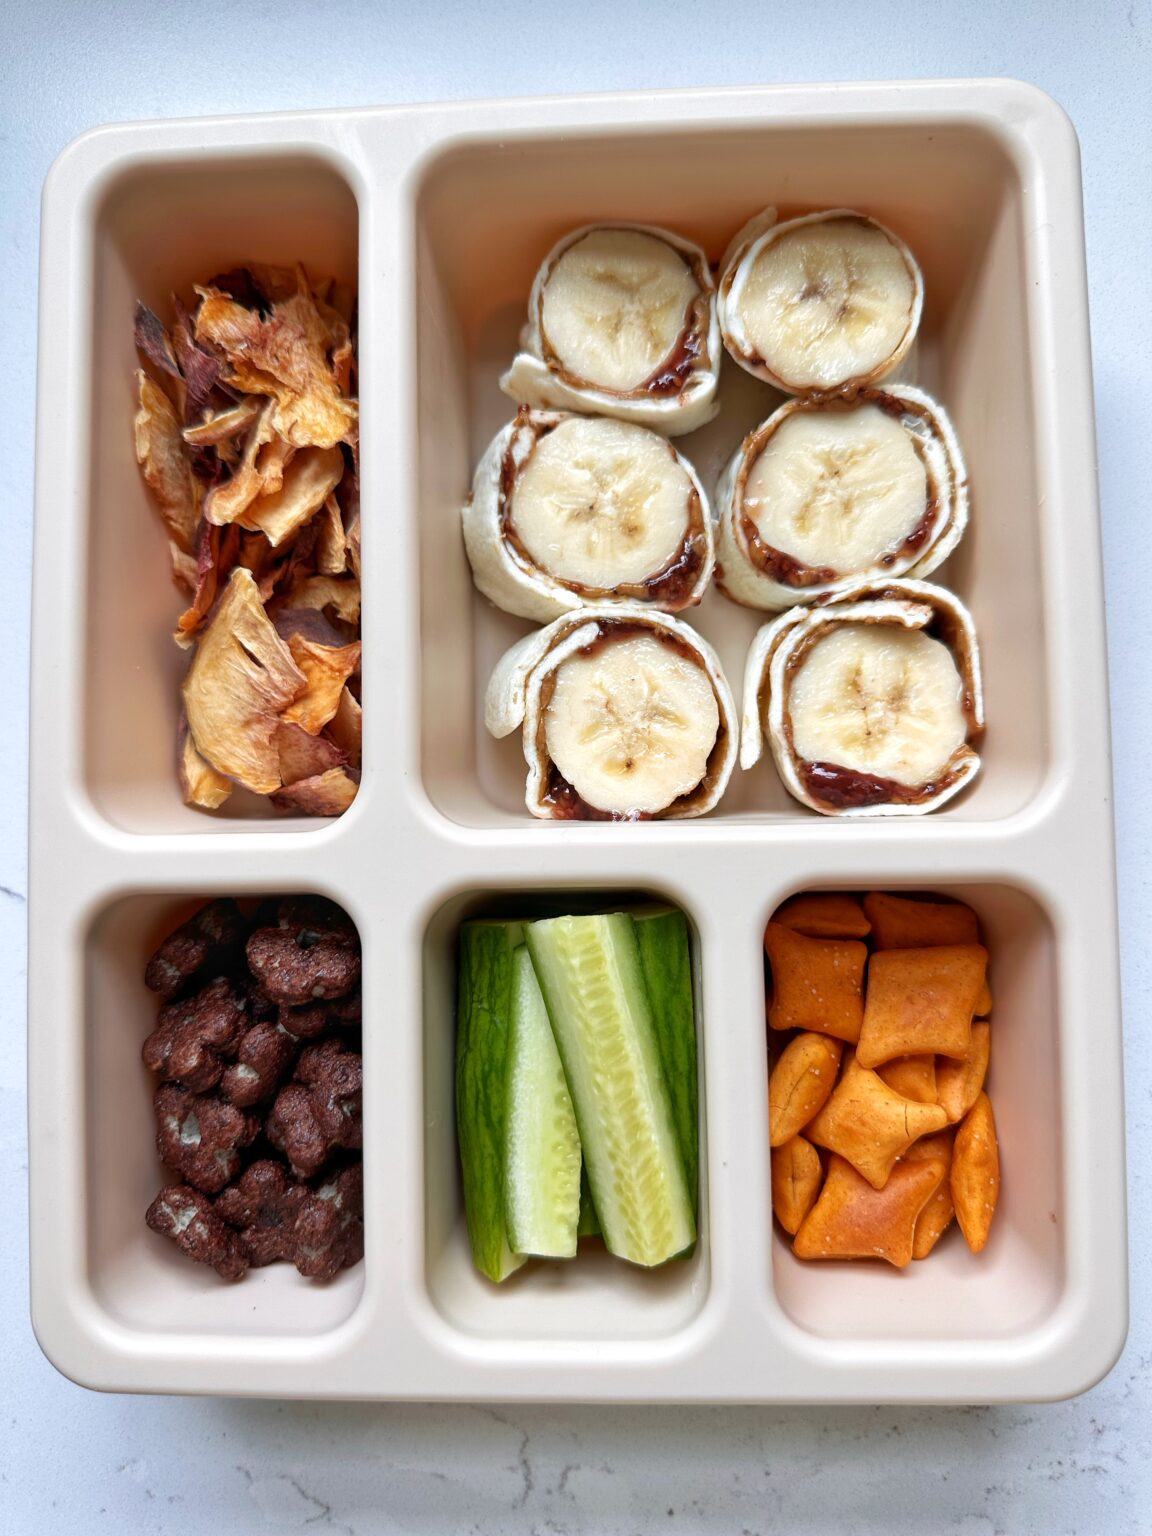 High Protein Lunch Idea for Kids - rachLmansfield